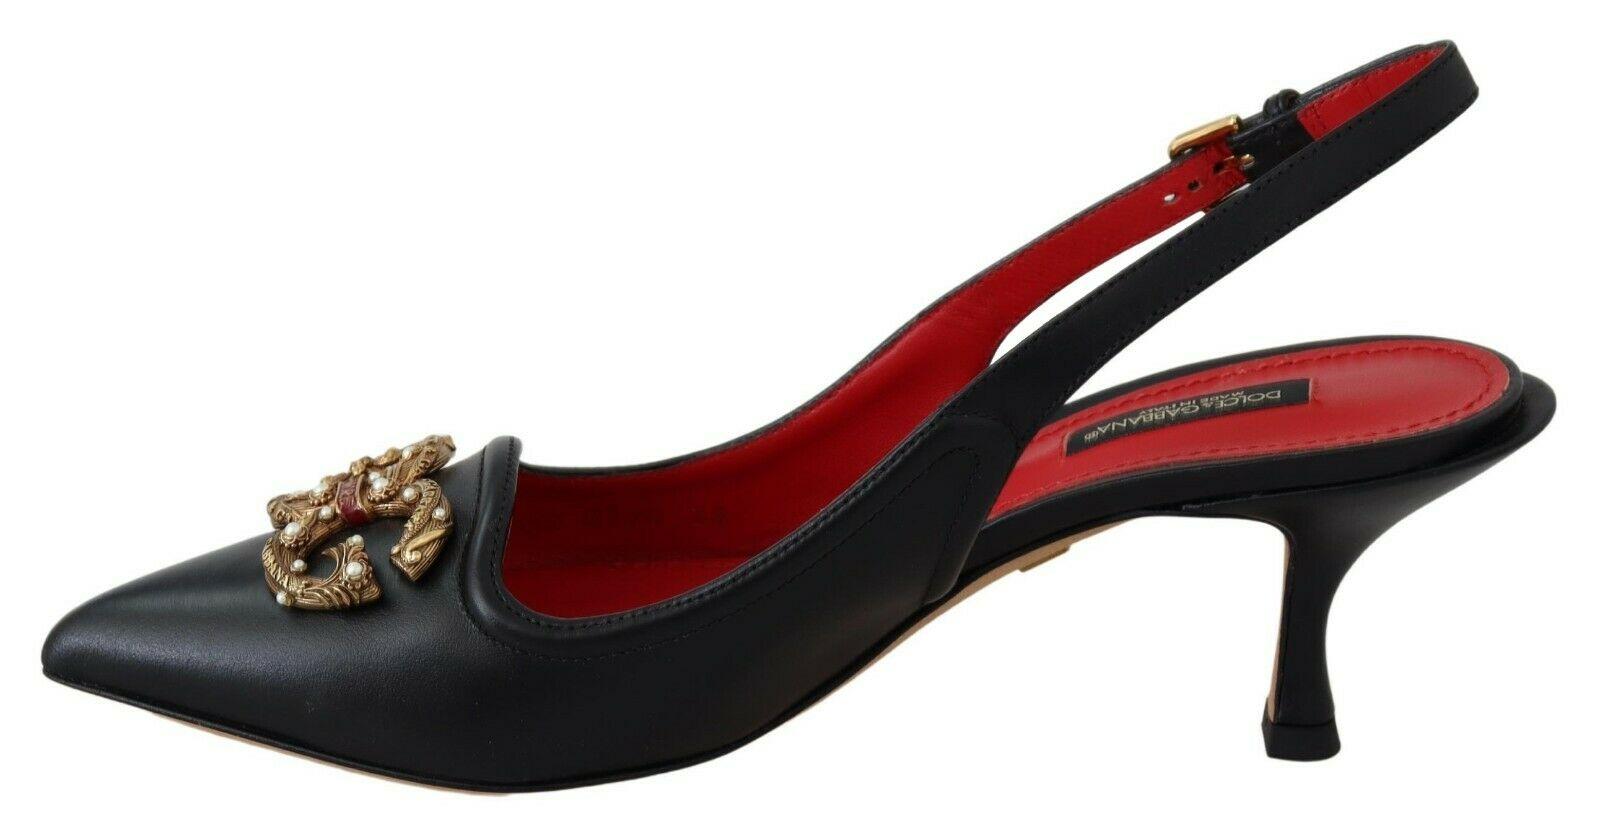 Gorgeous brand new with tags, 100% Authentic Dolce & Gabbana Black ‘Slingback’ pumps with a cut-out detail. Made of leather. Decorated with a buckle strap. Decorated with a metal logo appliqué in gold-tone, cream and red. Beige leather